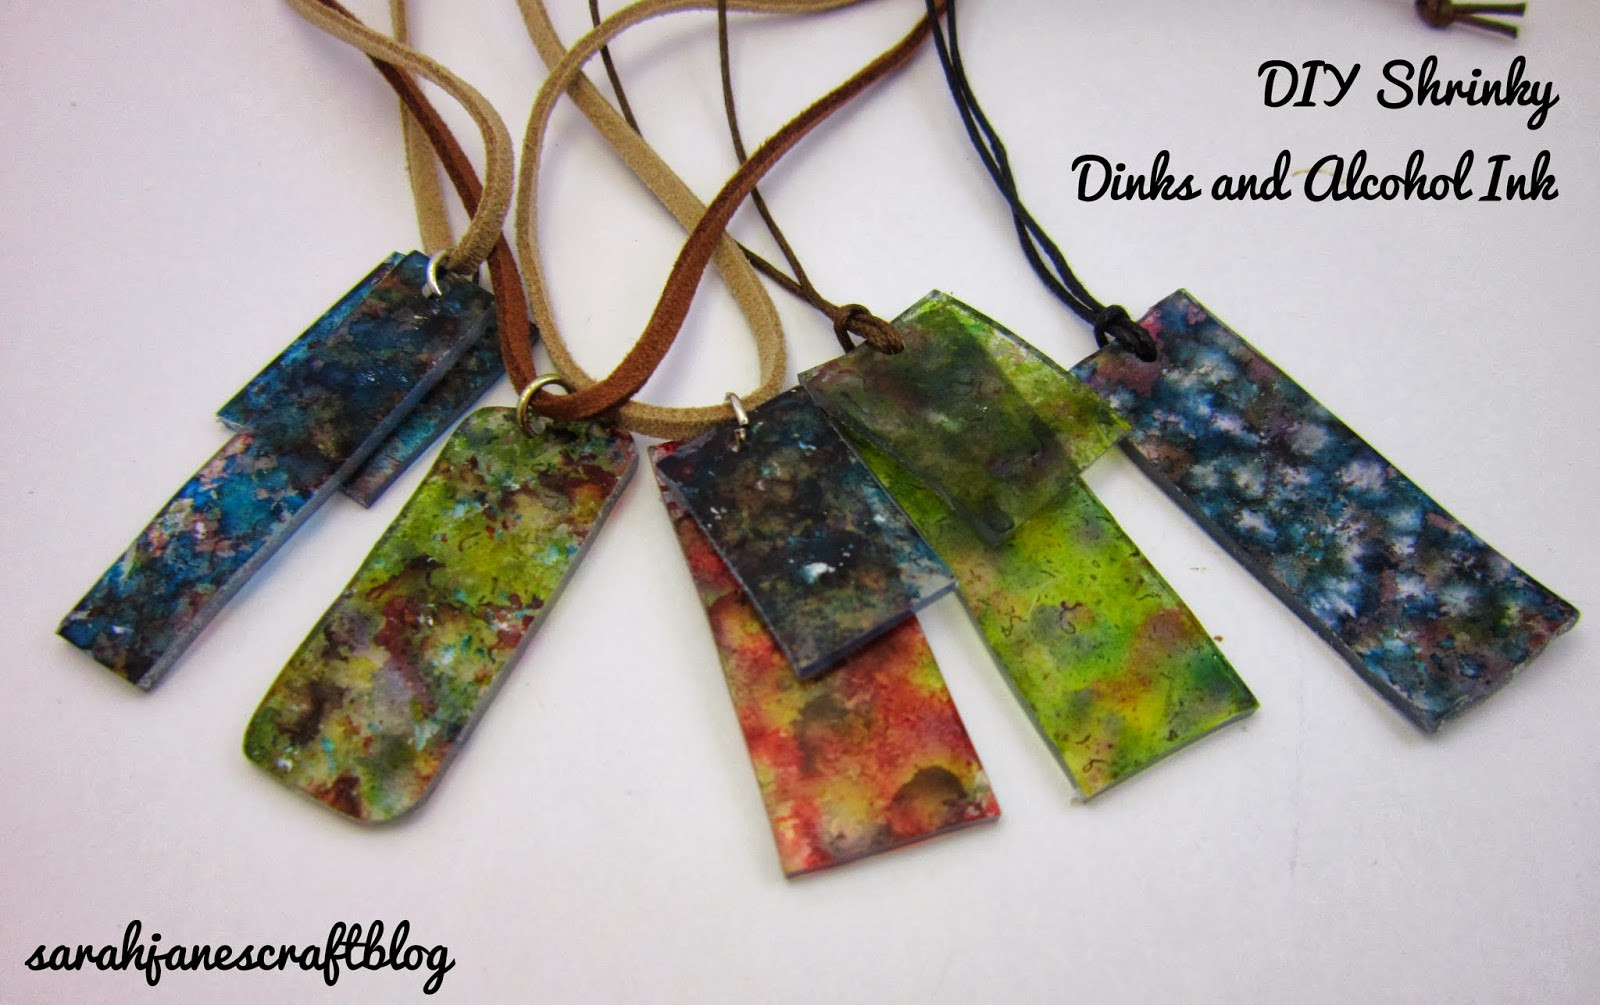 Best ideas about DIY Shrinky Dinks
. Save or Pin Sarah Jane s Craft Blog DIY Shrinky Dinks and Alcohol Ink Now.